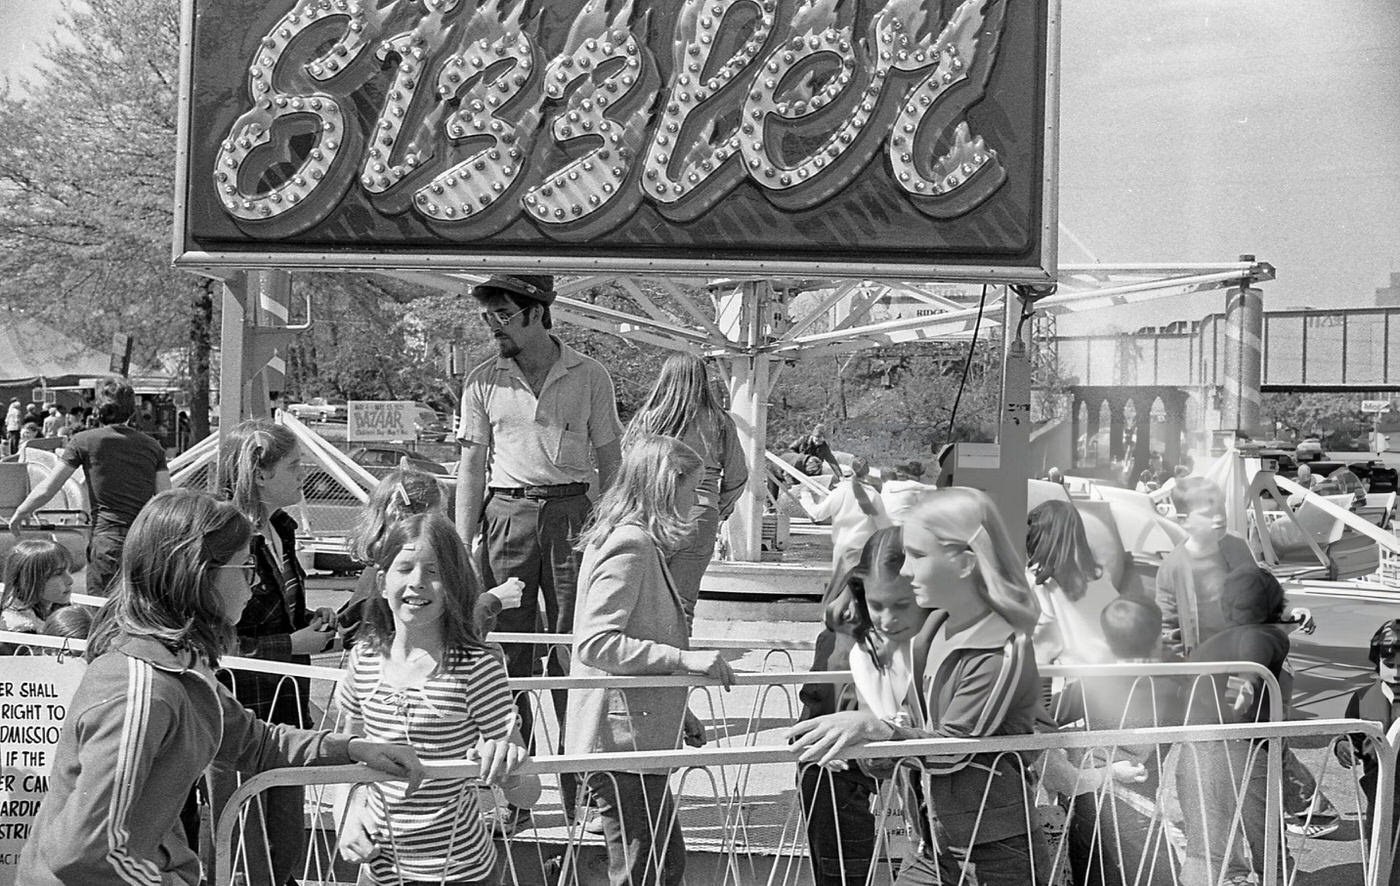 Children Exiting The 'Sizzler' Ride At The Resurrection Ascension Church Carnival In Rego Park, Queens, 1979.